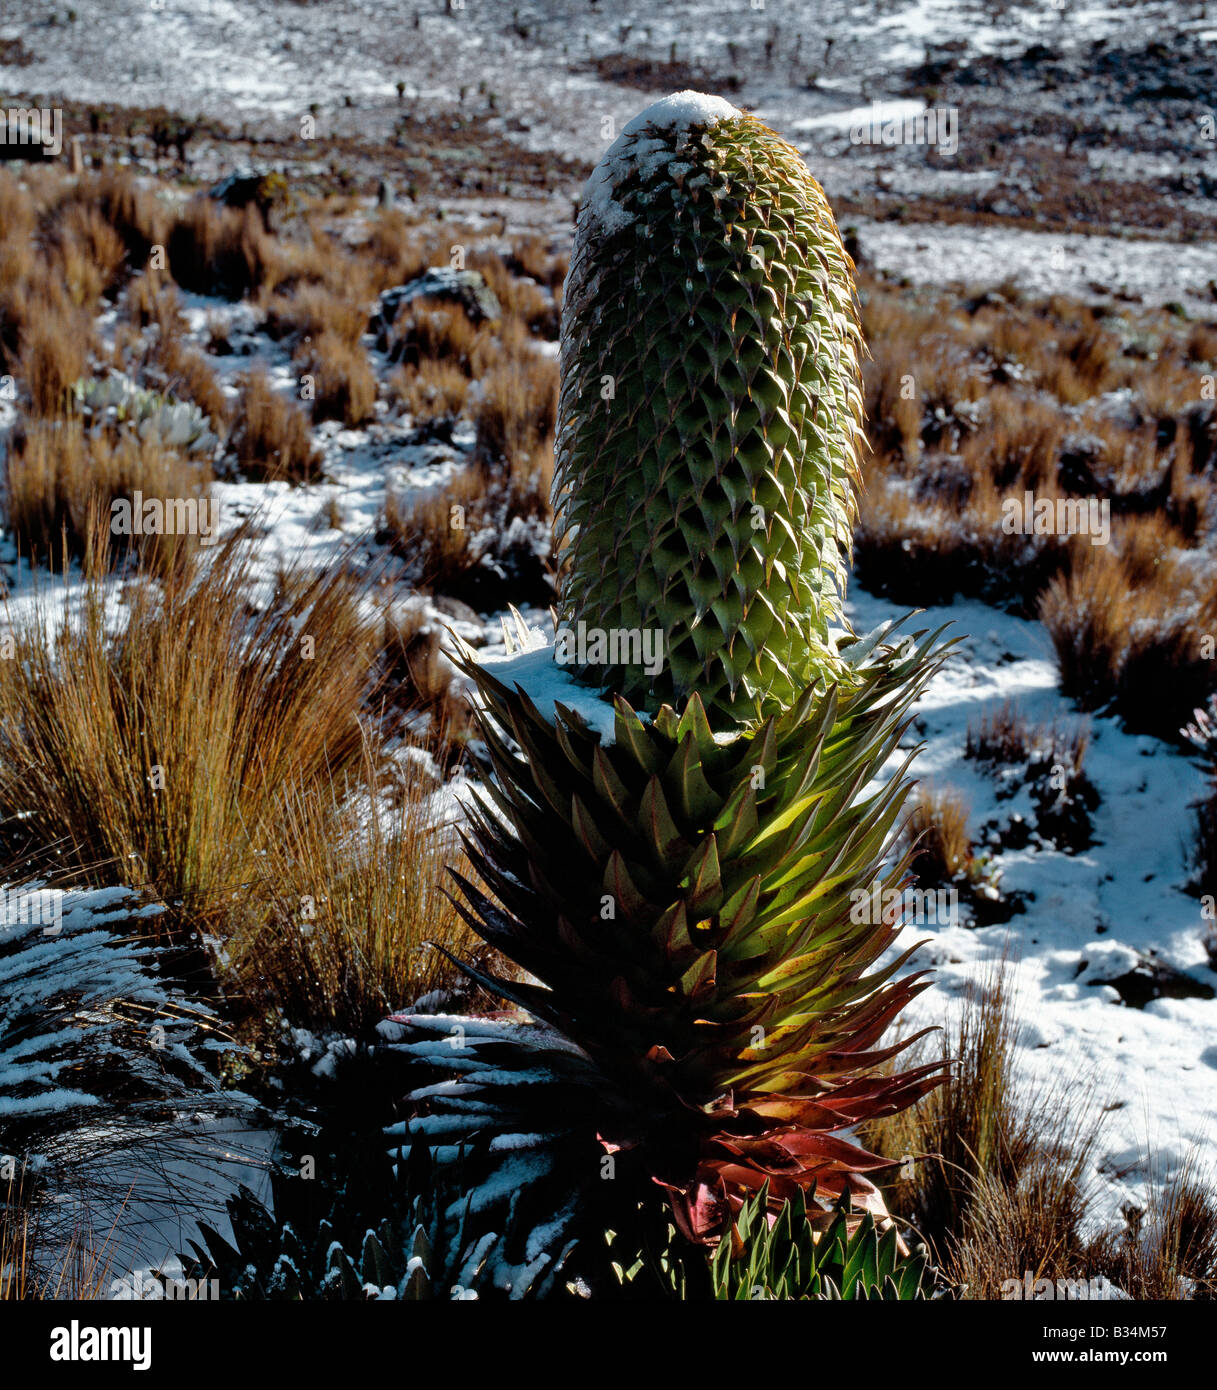 Kenya, Central Highlands, Mount Kenya. A lobelia (Lobelia deckenii spp keniensis) flourishes in snow on the upper slopes of Mount Kenya (17,058 feet). The range of this sub-species is restricted to the upper slopes of Mount Kenya, above 10,500 feet. Stock Photo